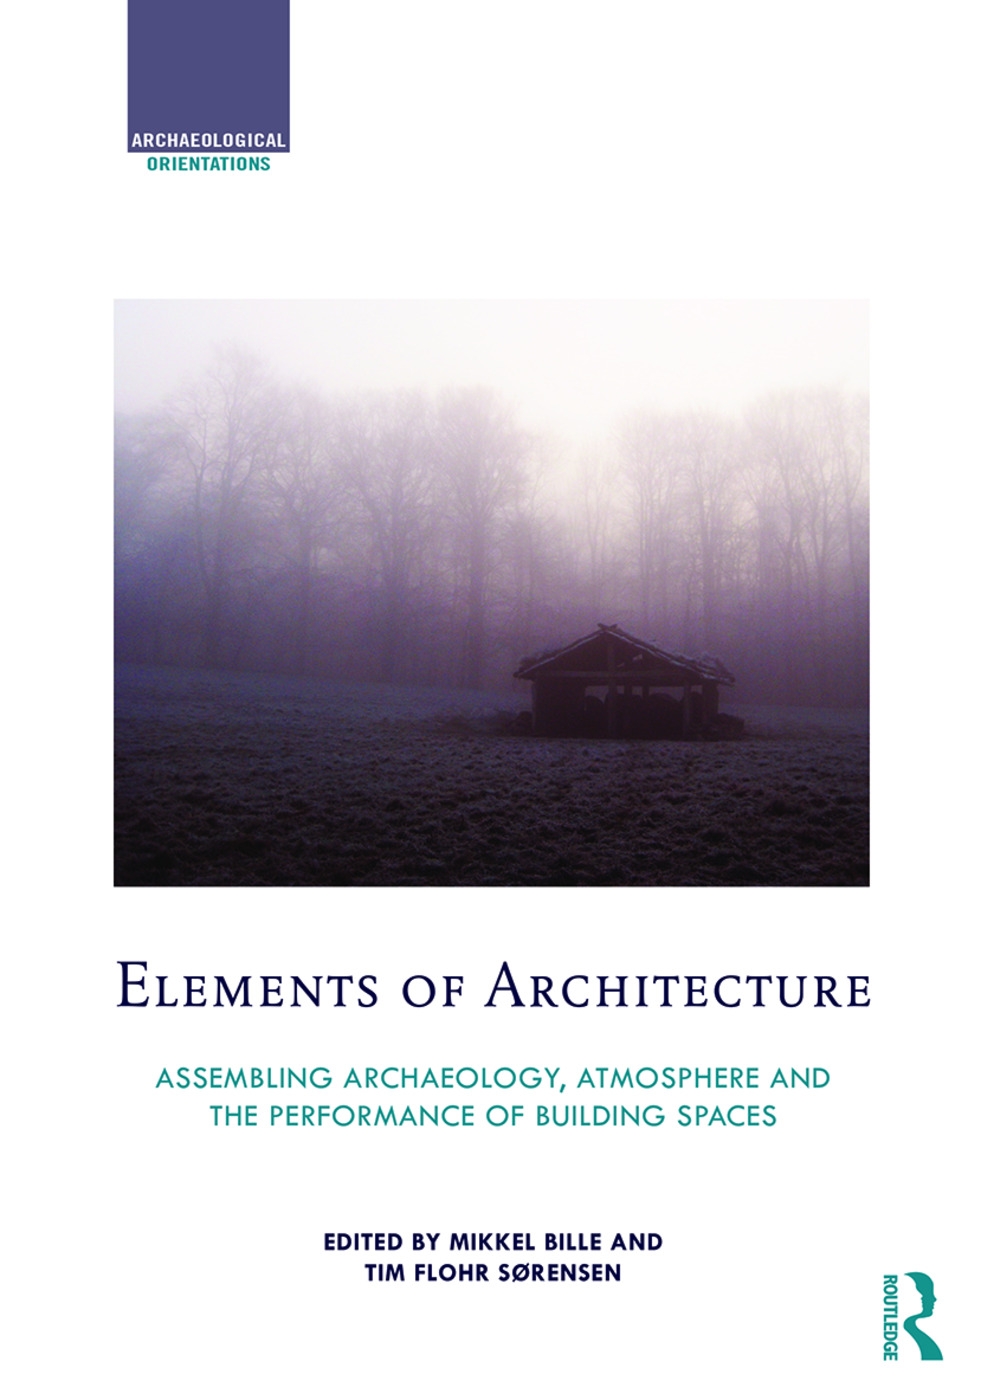 Elements of Architecture: Assembling Archaeology, Atmosphere and the Performance of Building Spaces